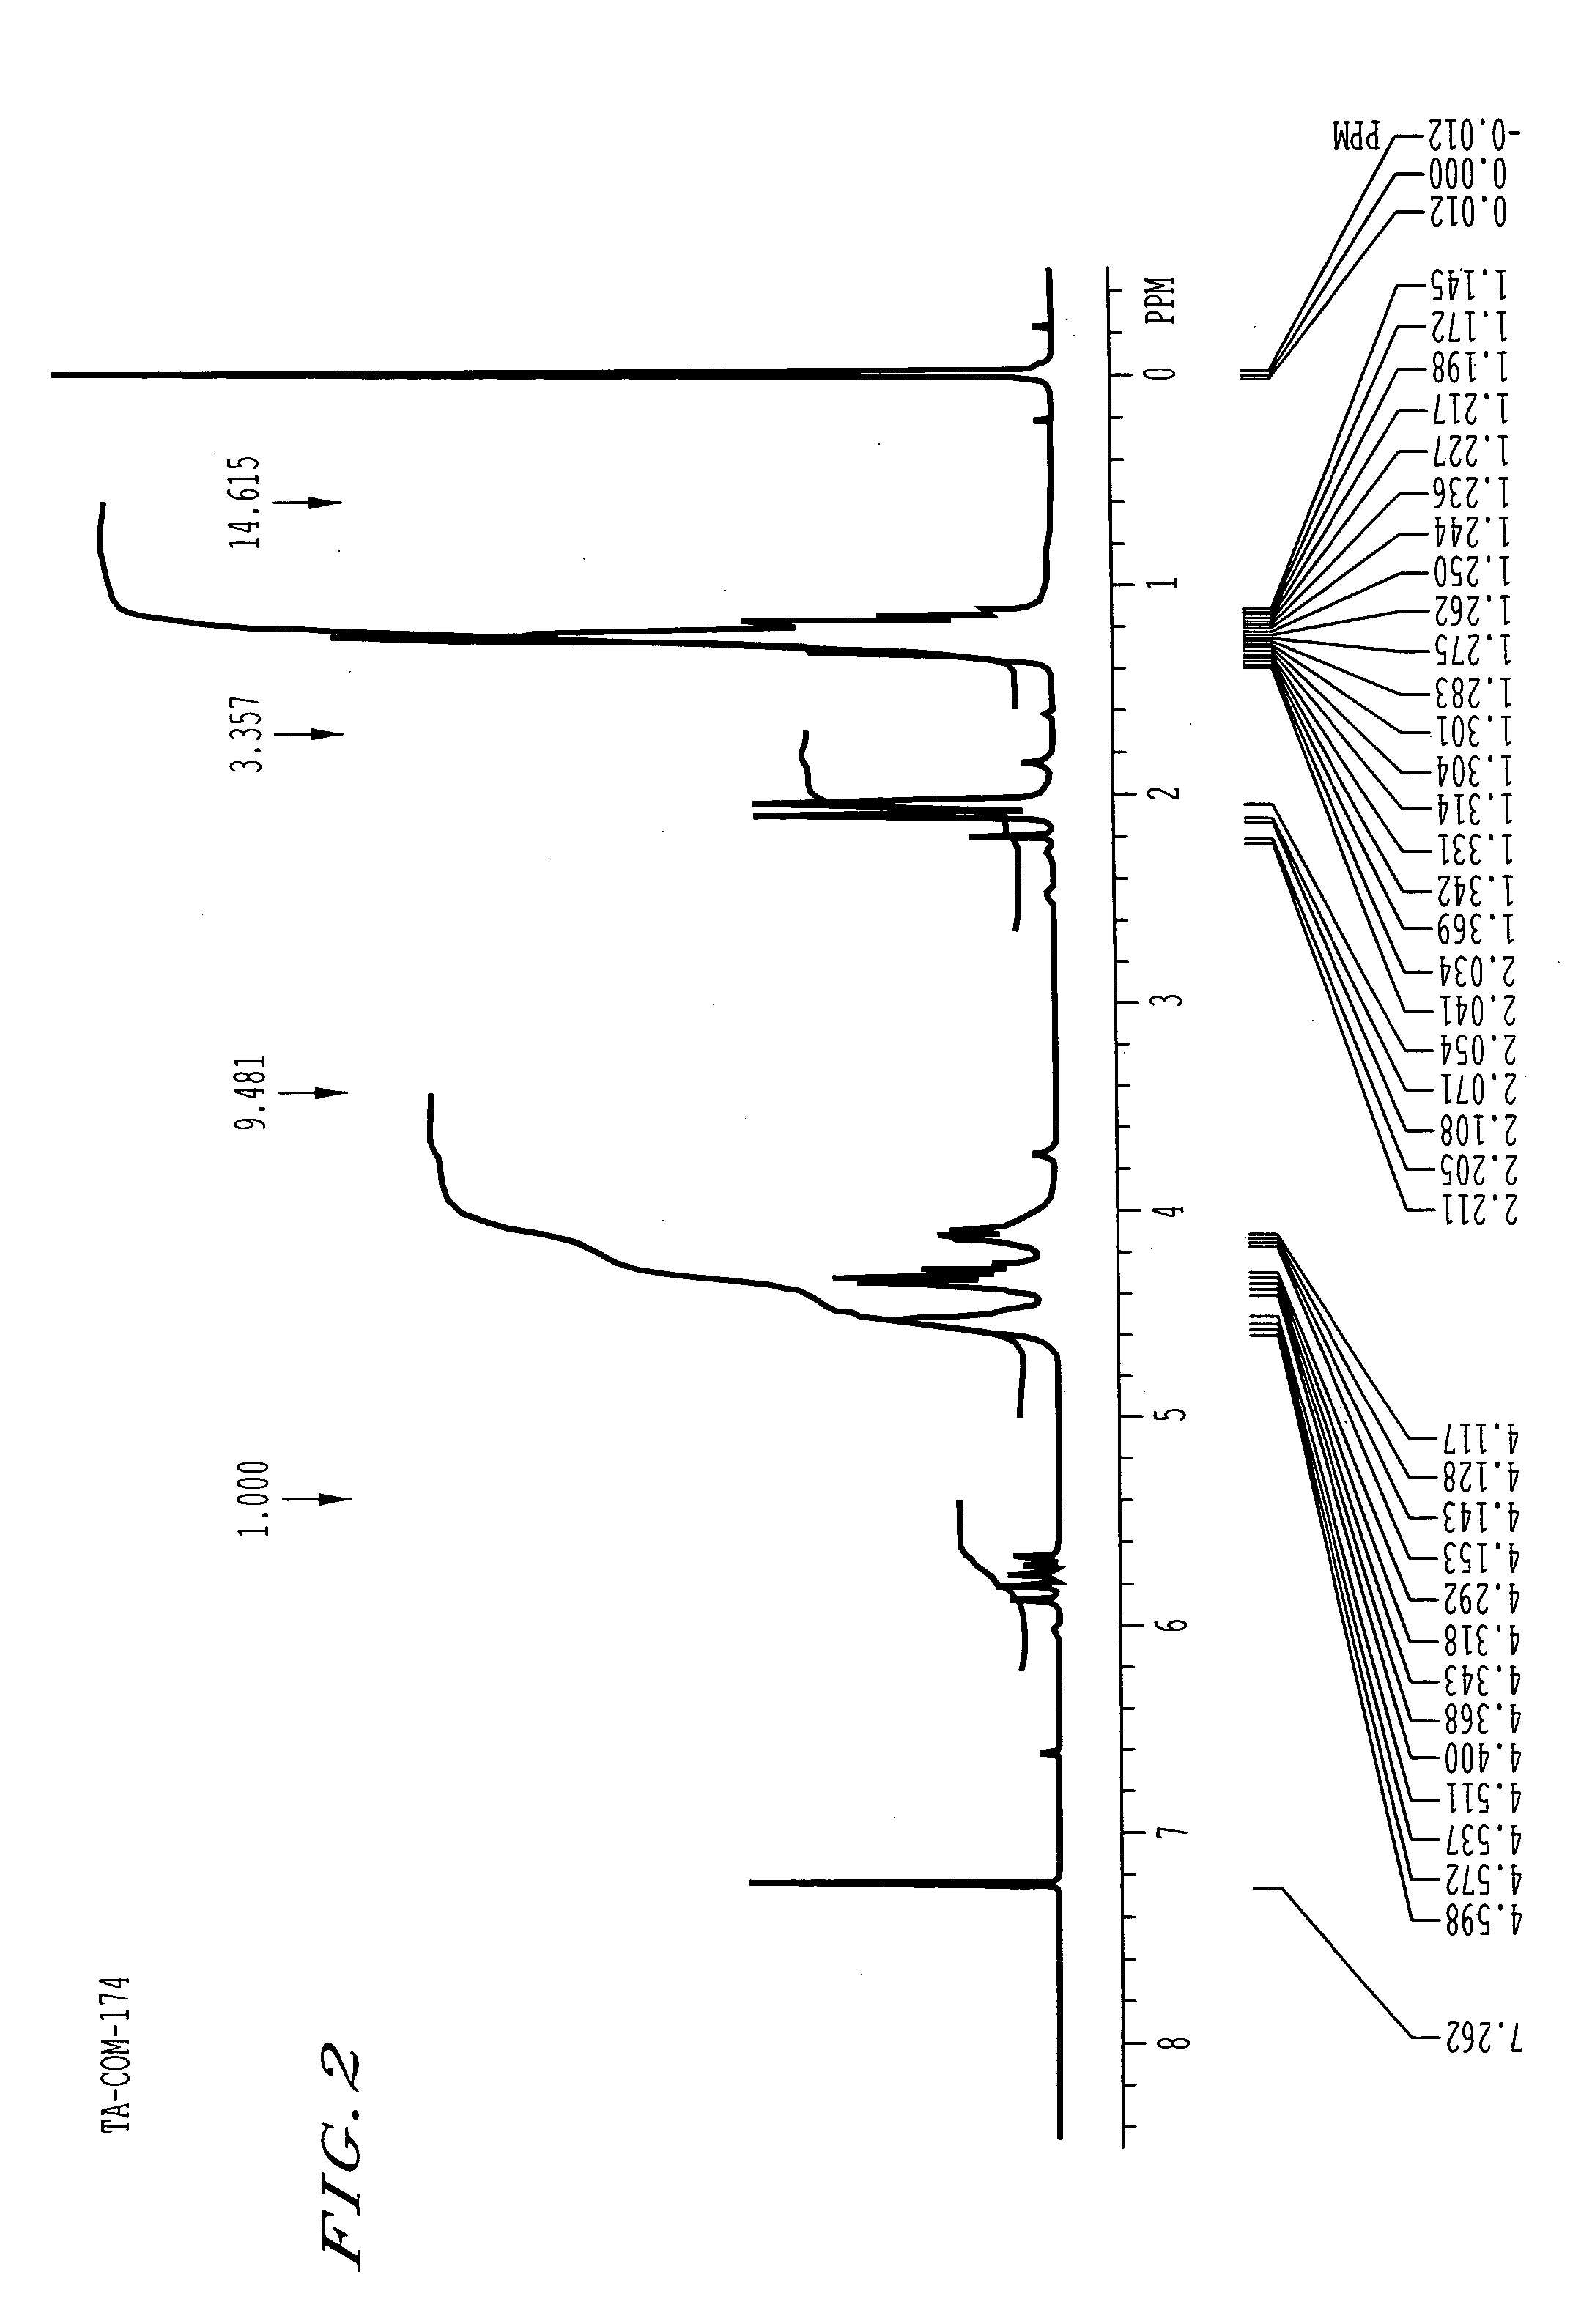 Composition for forming a coating film, method of preparing the composition, tantalum oxide film and method of forming the tantalum oxide film